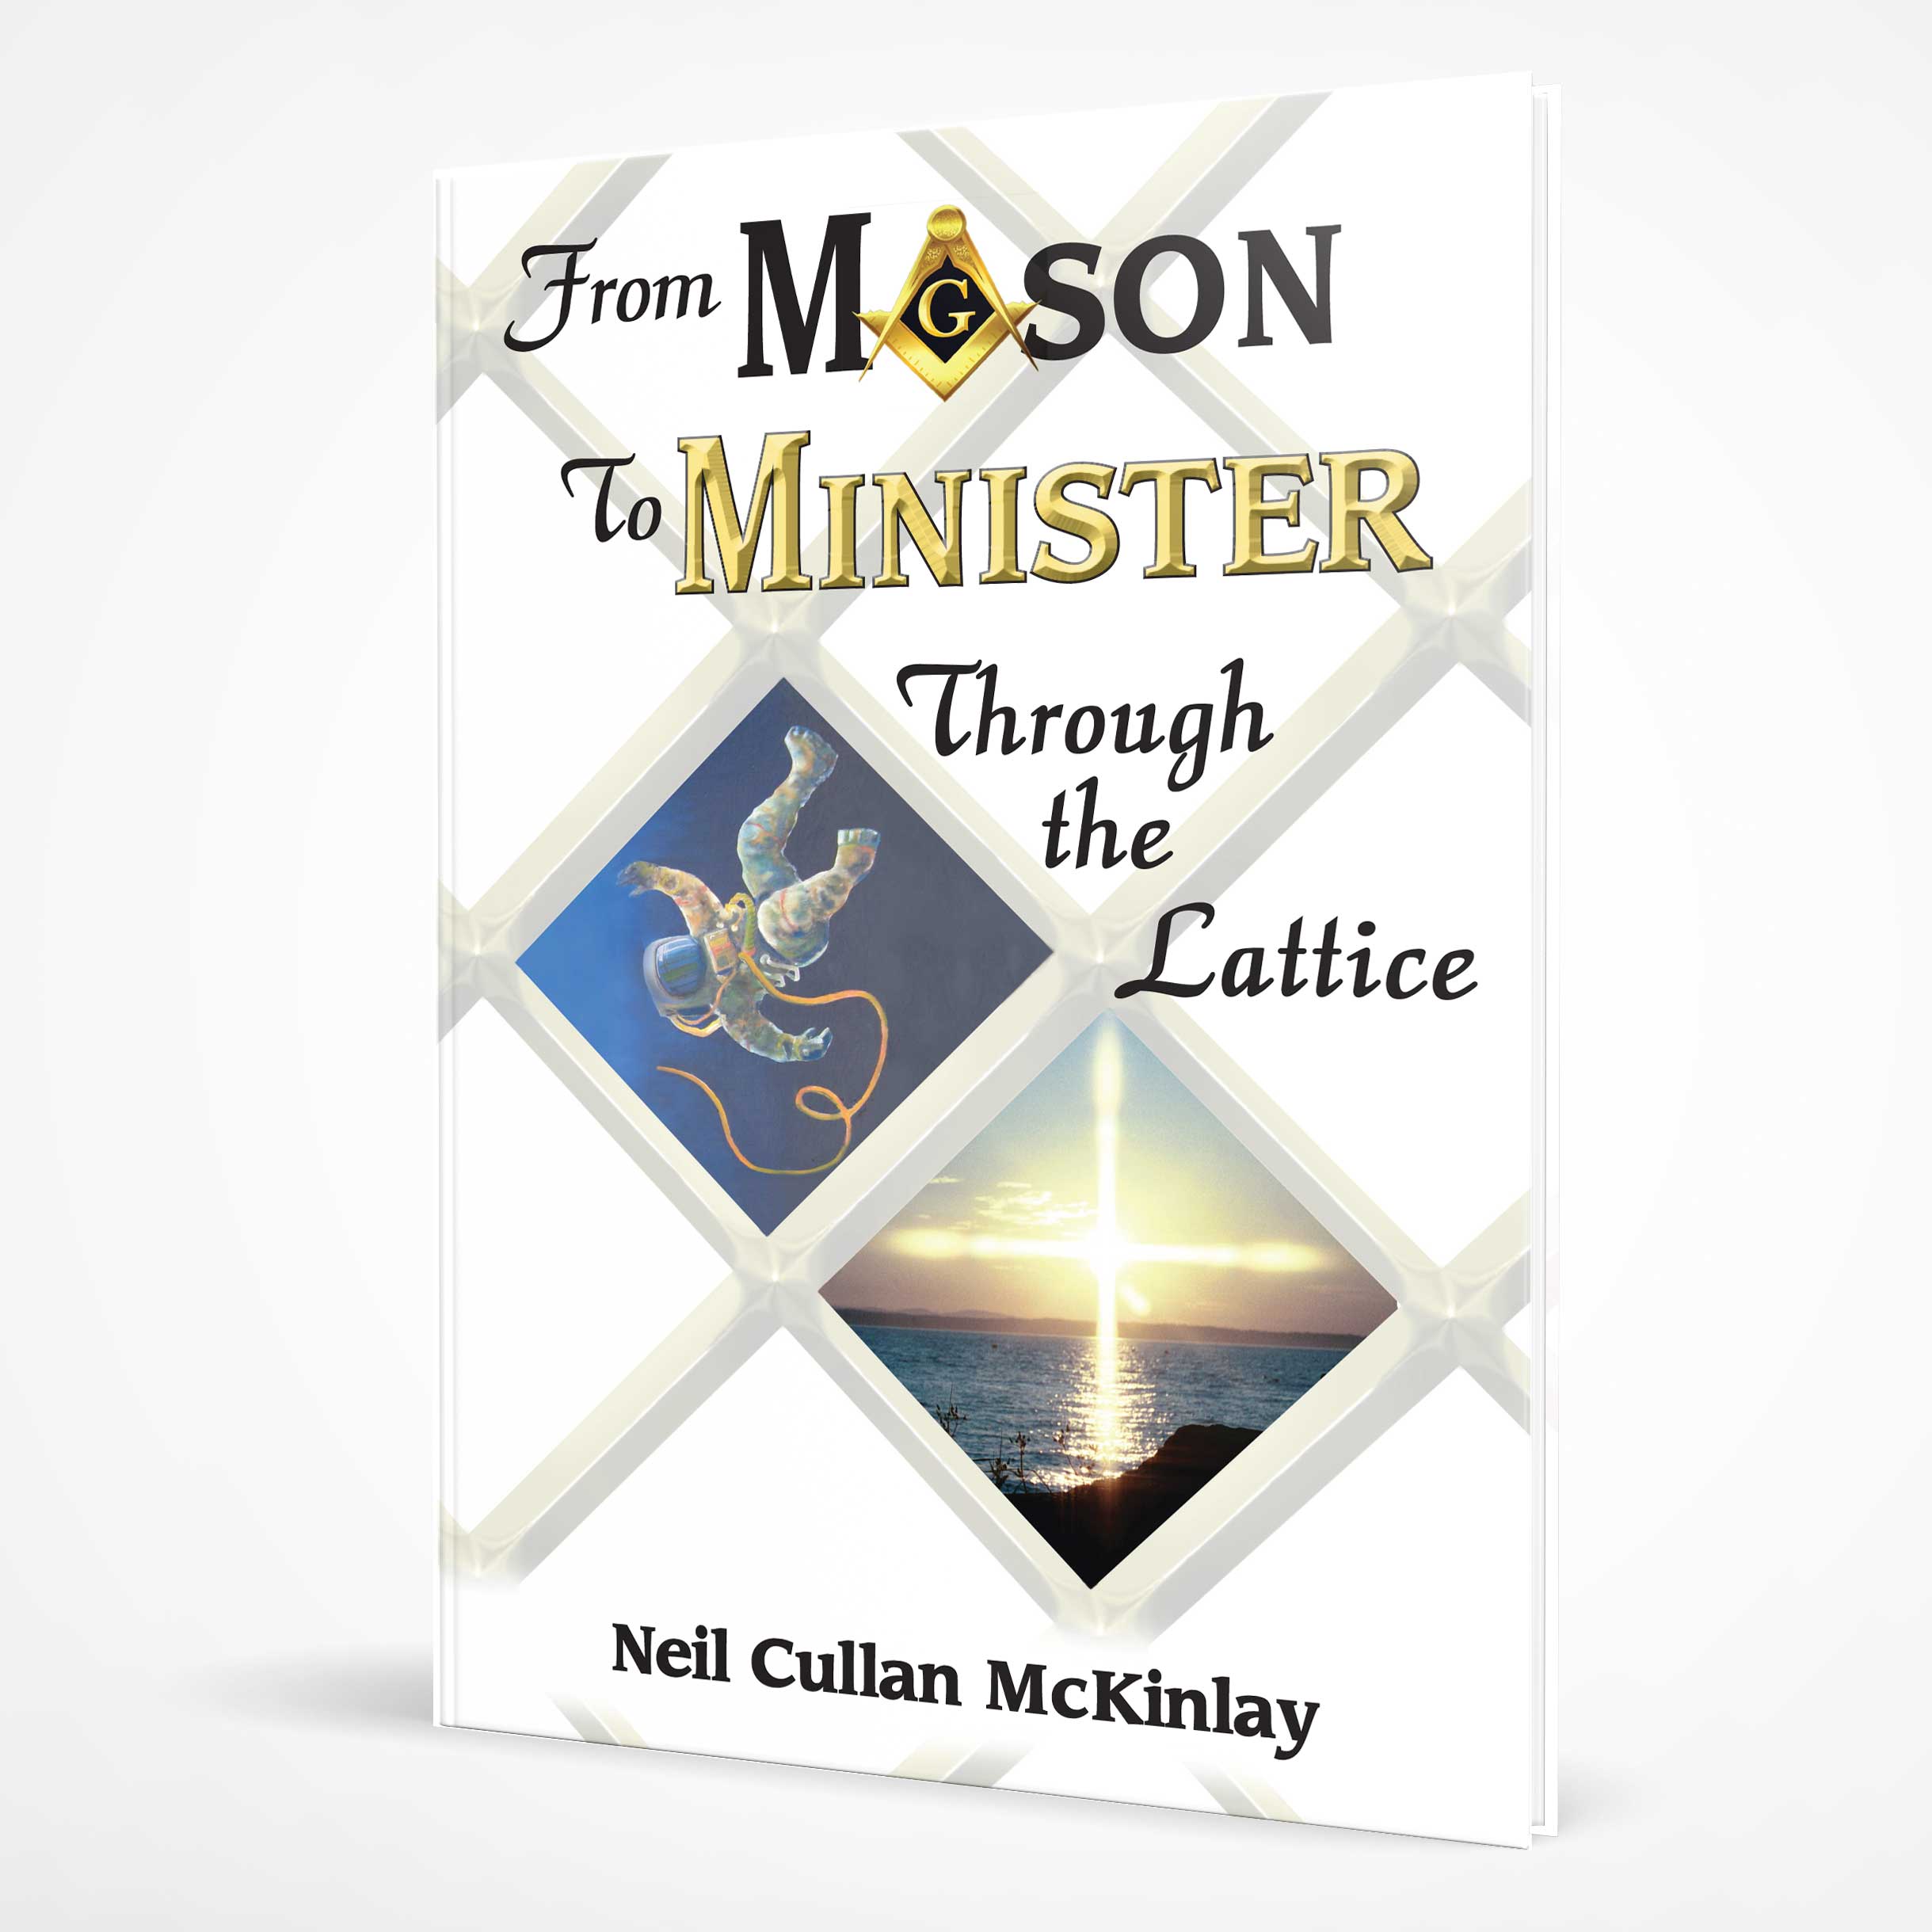 From Mason to Minister